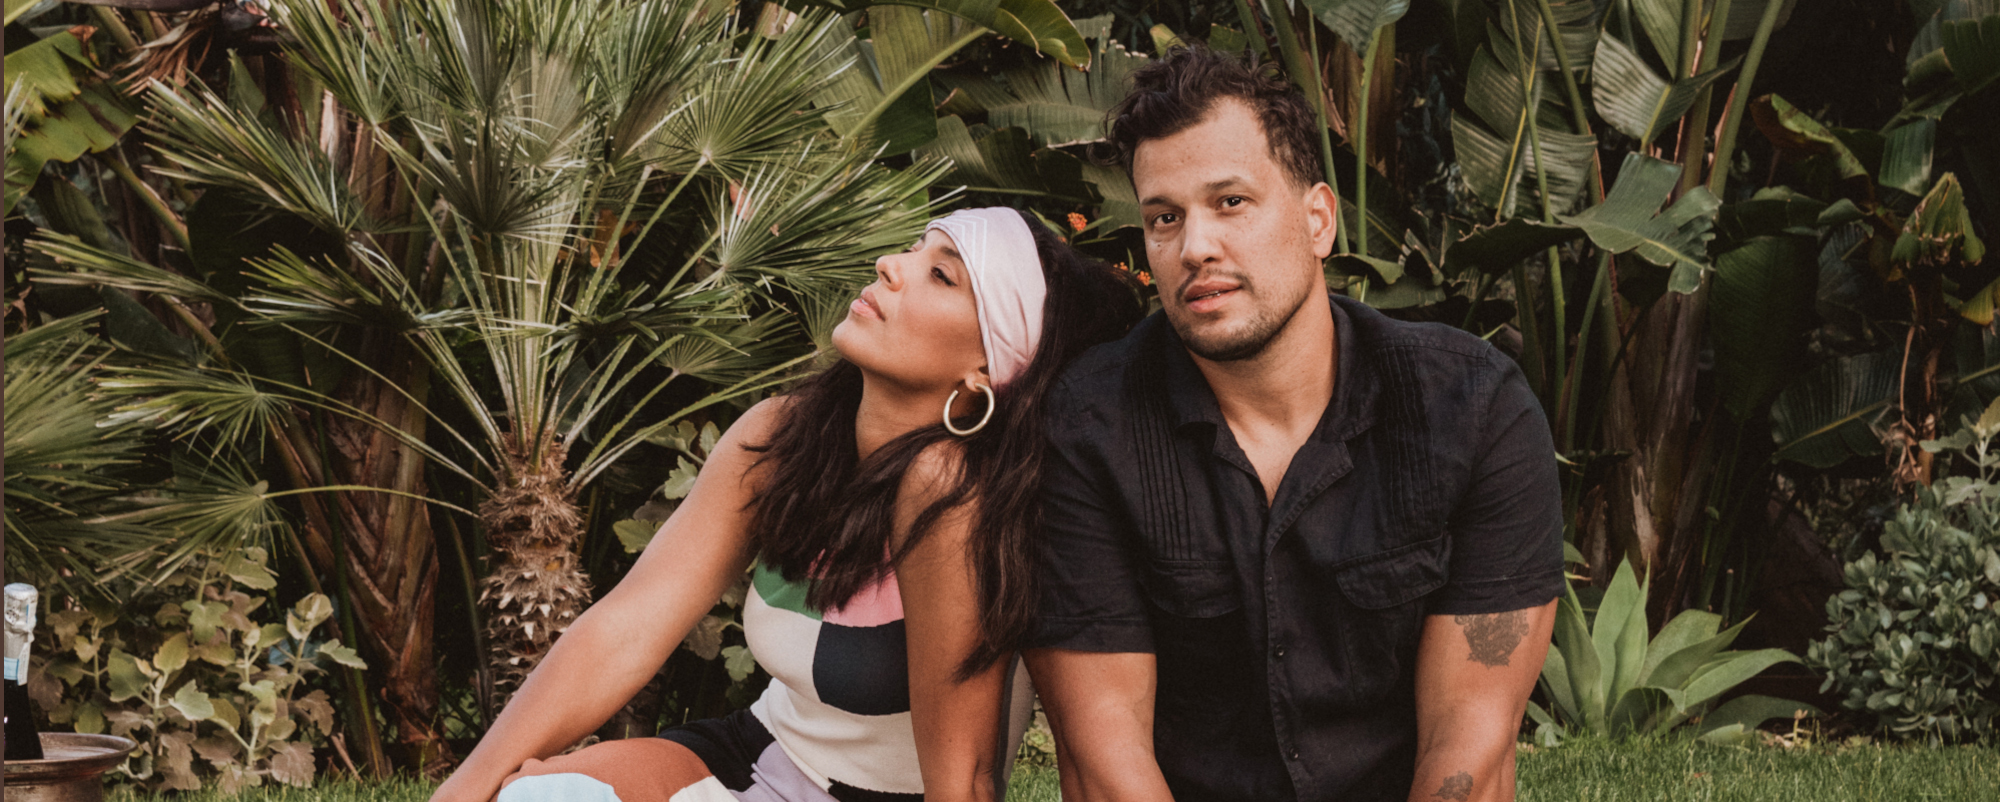 Review: Johnnyswim Seek To Address Our Questions and Concerns